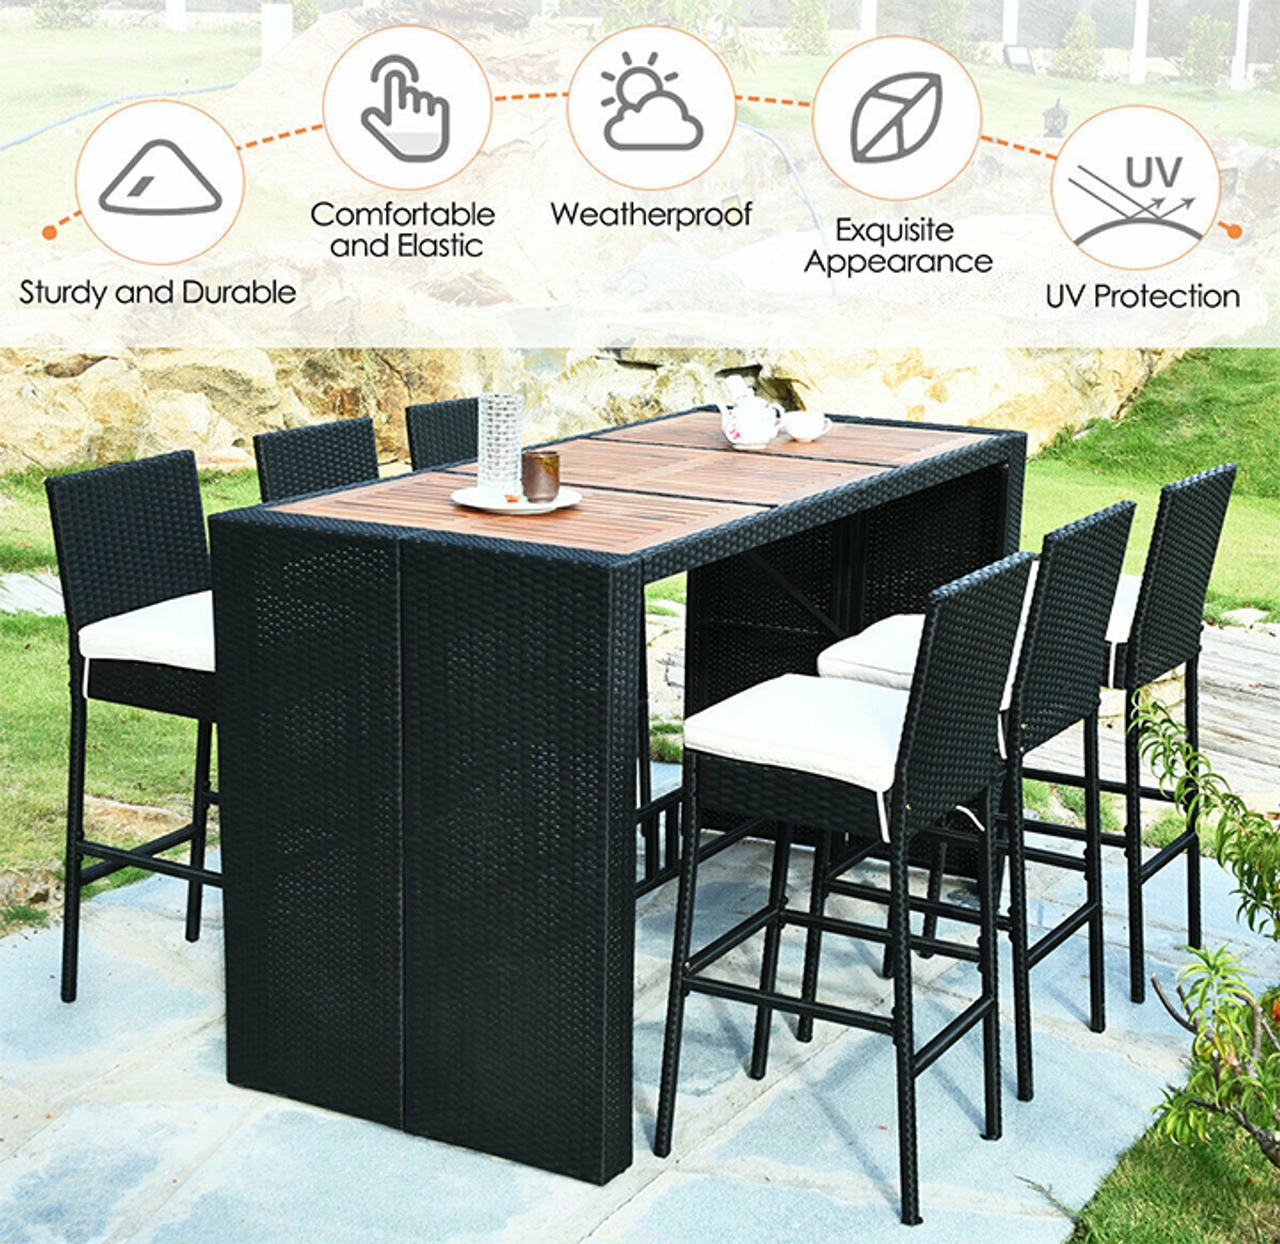 Rattan and Wood 7-Piece Bar Height Patio Dining Set product image